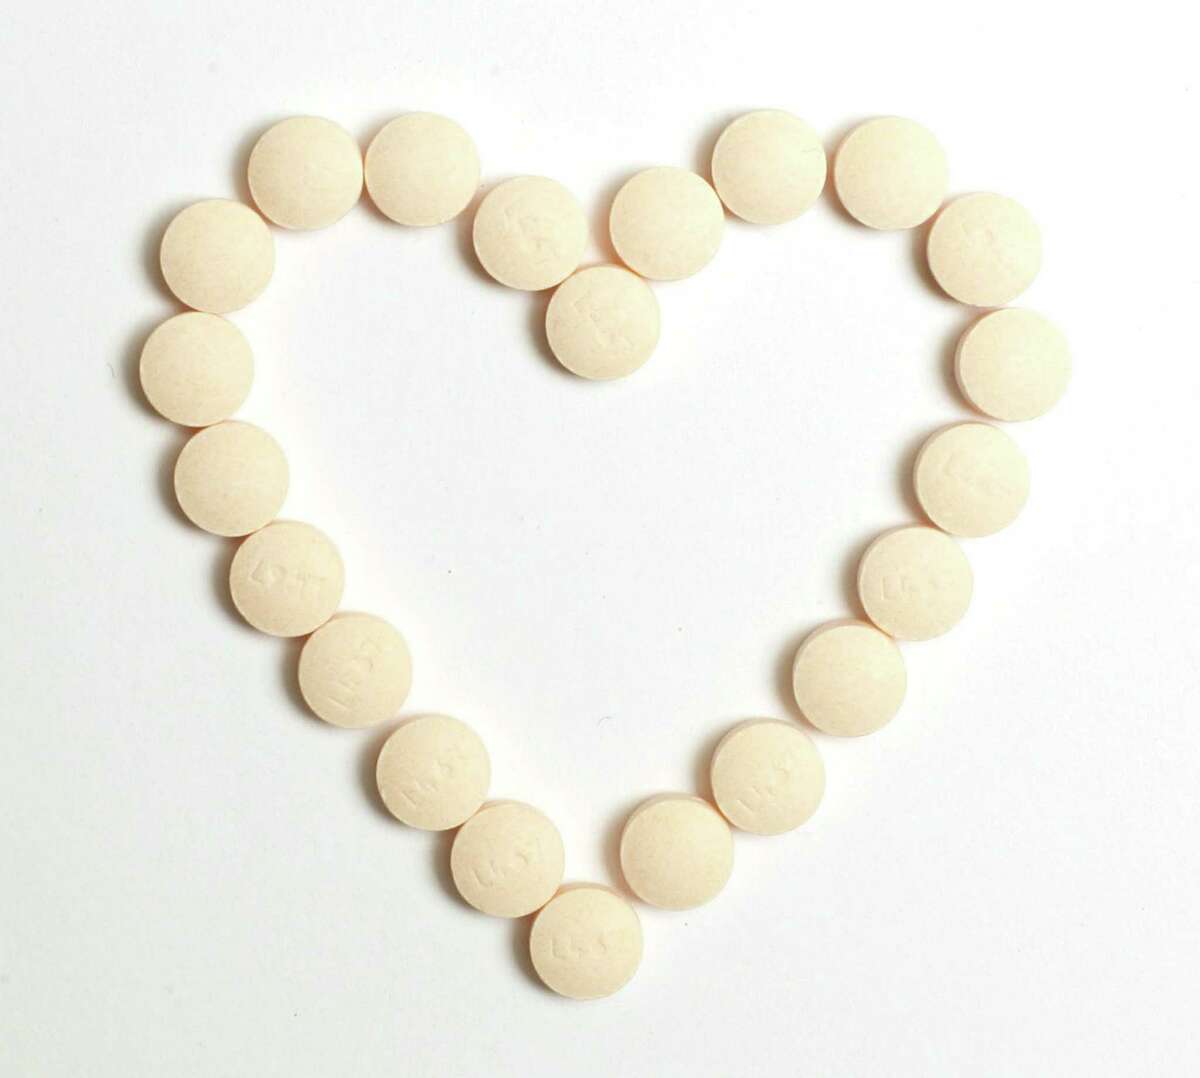 Many people take a daily low-dose aspirin to help dodge heart attacks, but now researchers say it will also slash your risk for cancer.